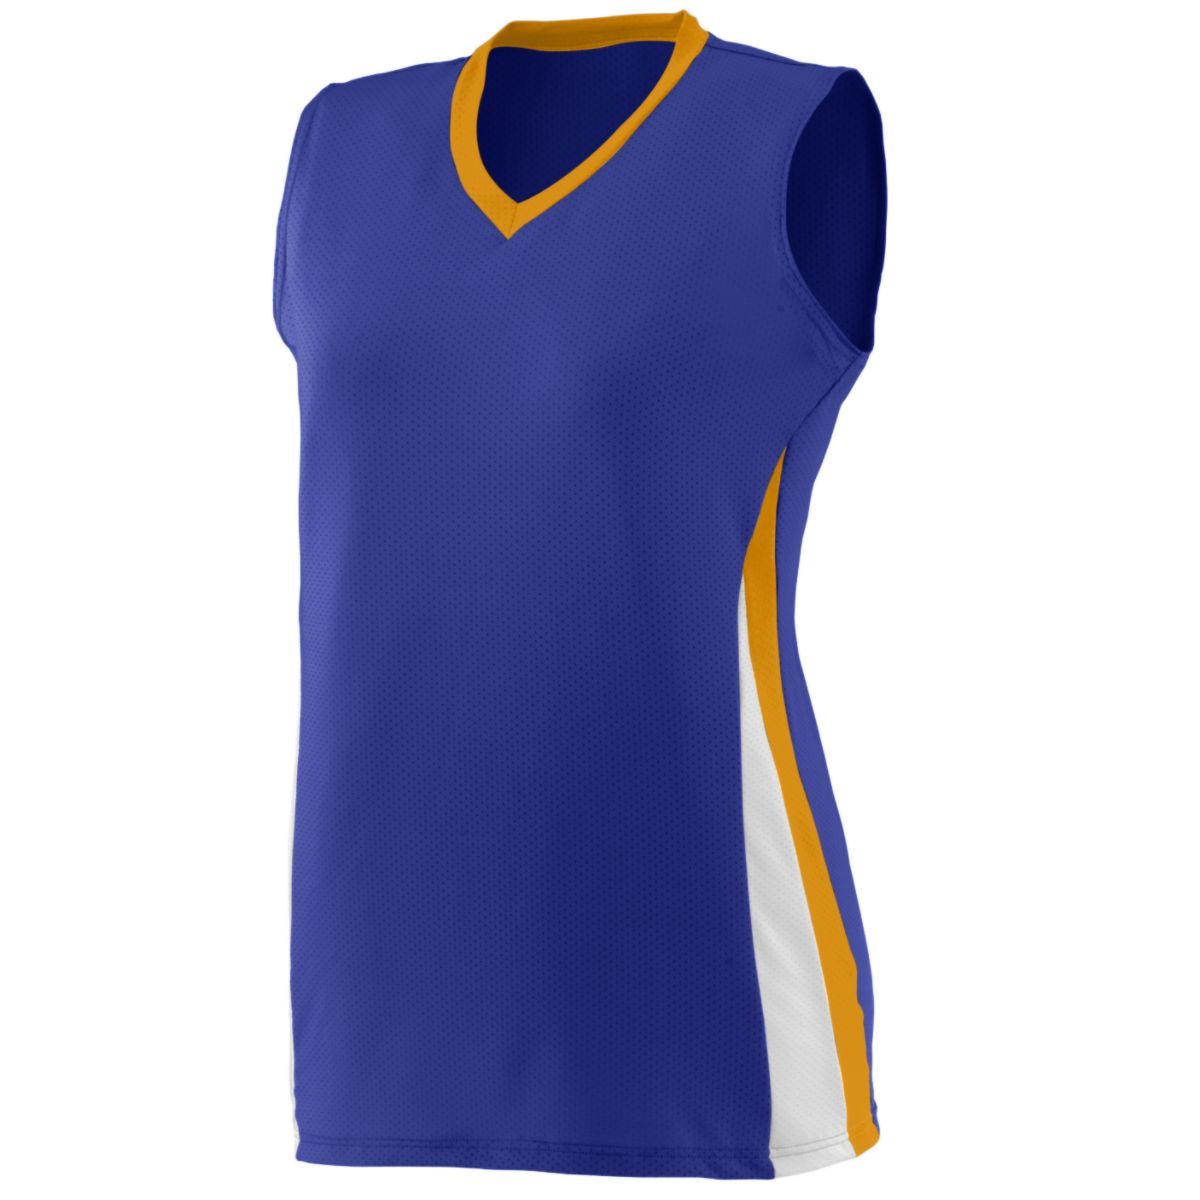 Augusta Sportswear Girls Tornado Jersey in Purple/Gold/White  -Part of the Girls, Augusta-Products, Volleyball, Girls-Jersey, Shirts product lines at KanaleyCreations.com